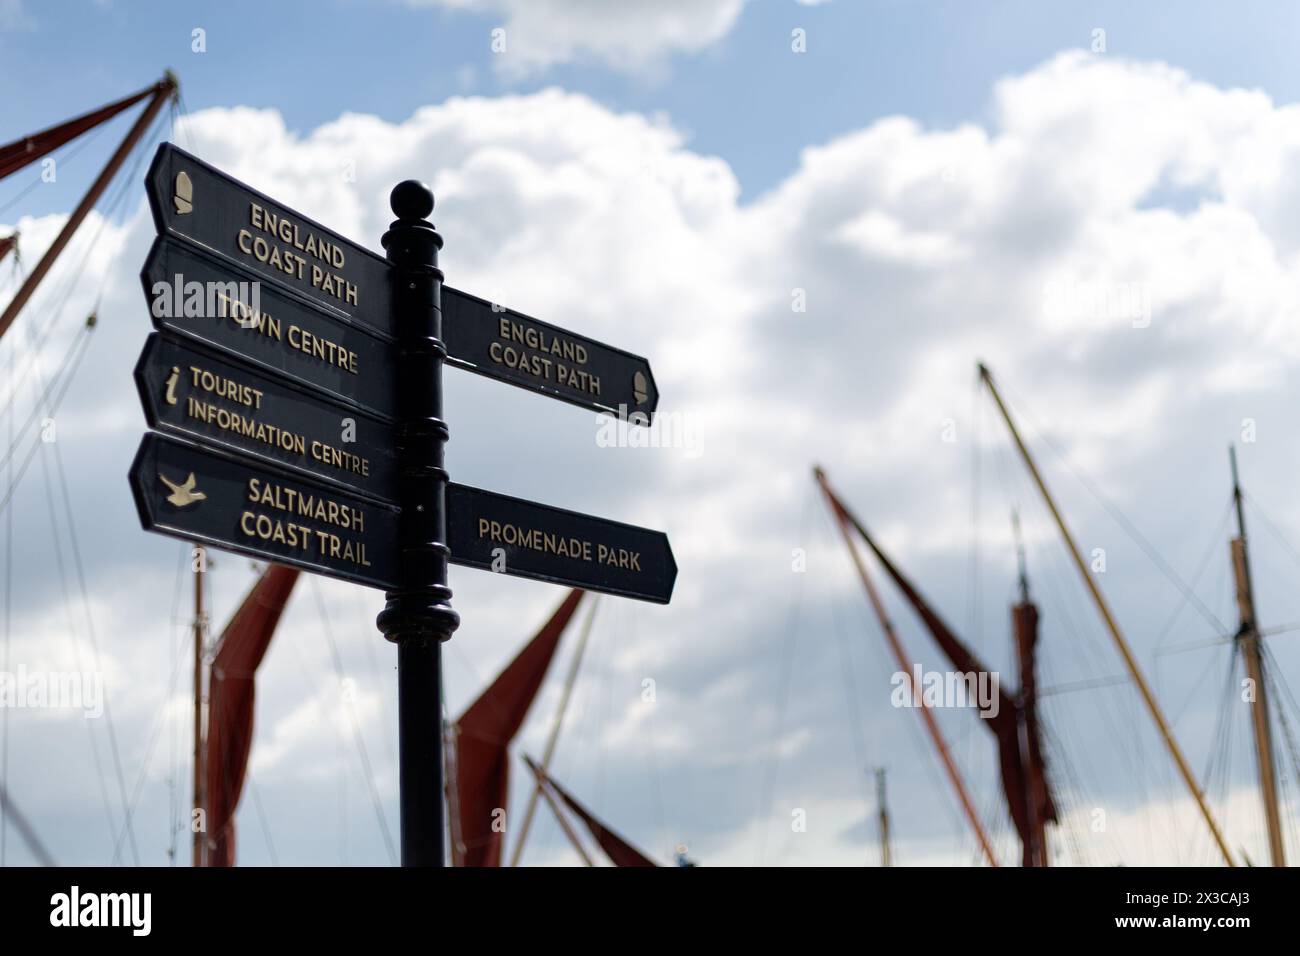 MALDON, ESSEX, UK - APRIL 25, 2024:  Signpost on Hythe Quay with directions to Coastpath Town Centre and Saltmarsh Coast Trail Stock Photo